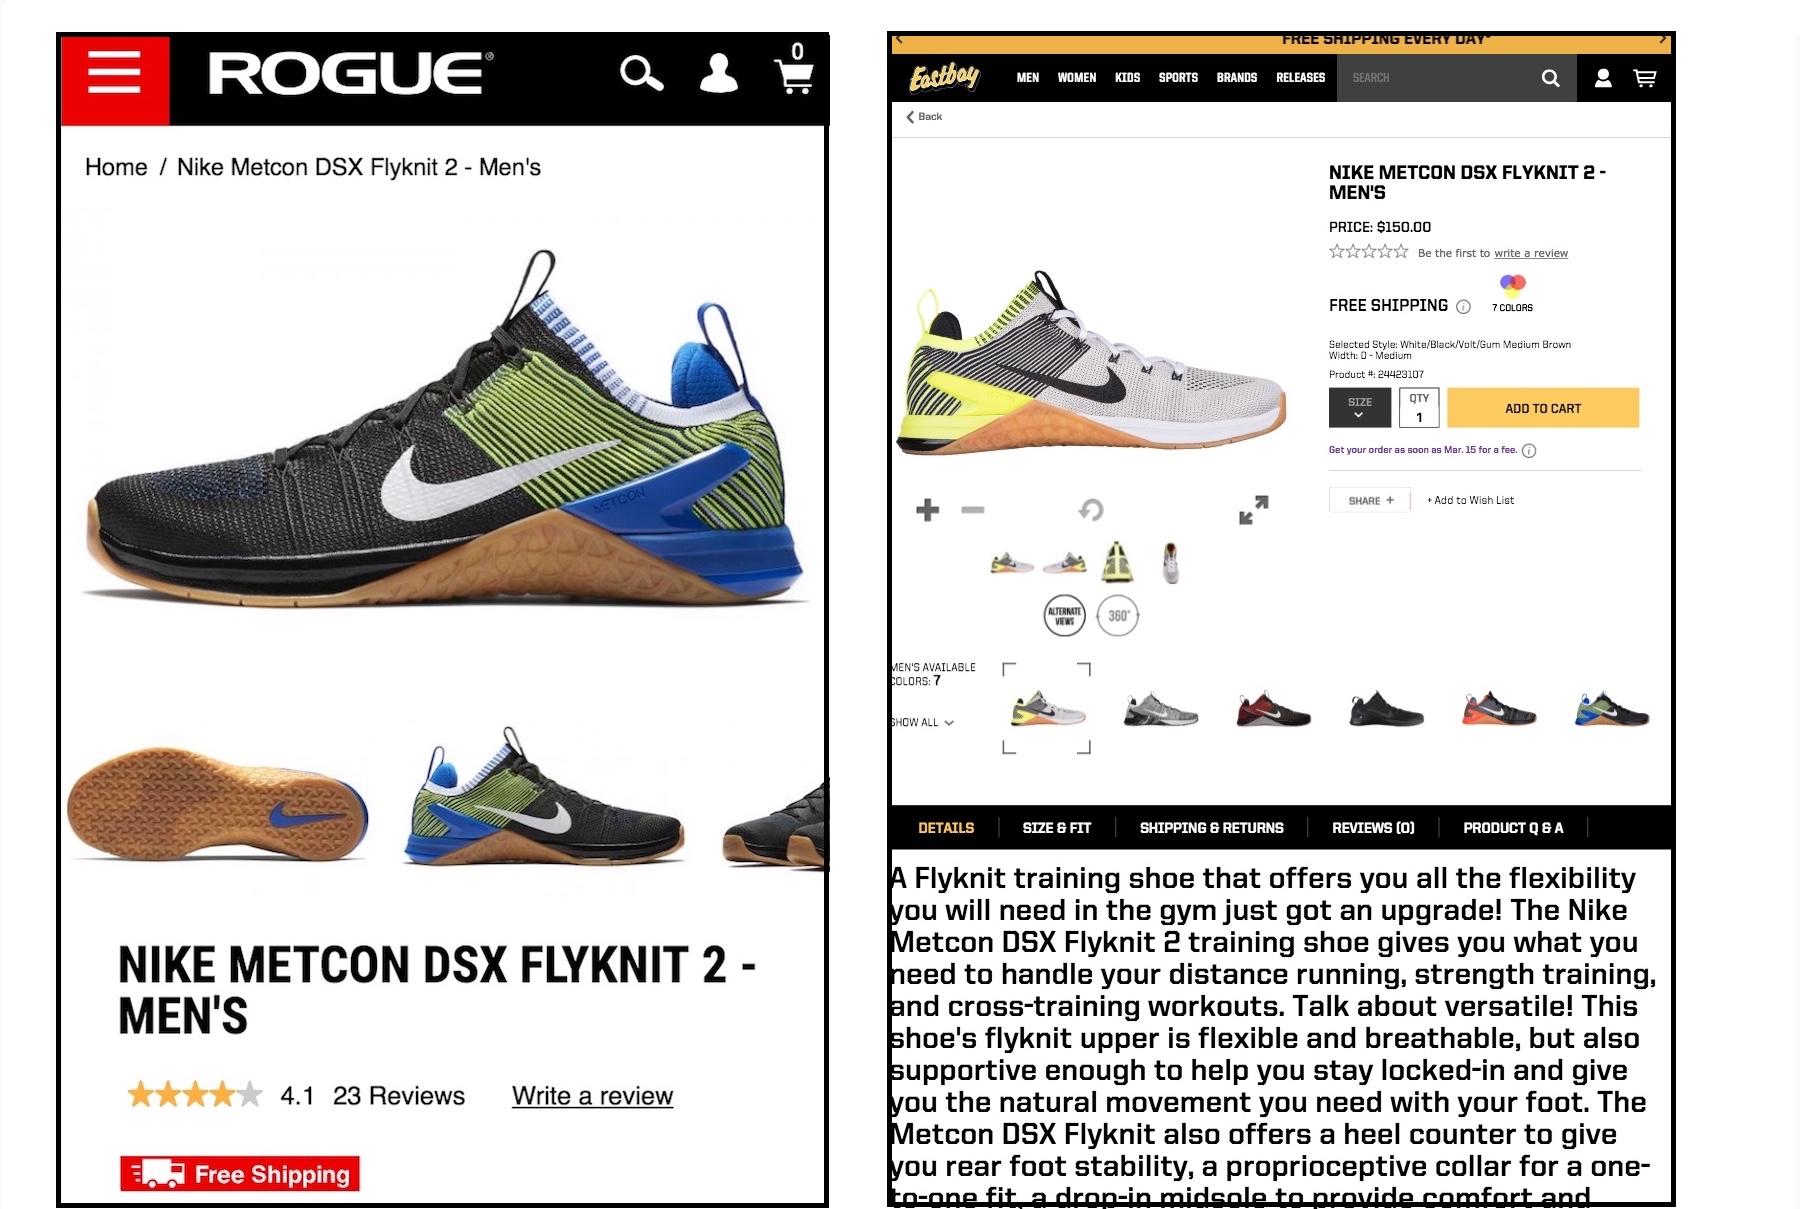 Screenshot showing product page and its description